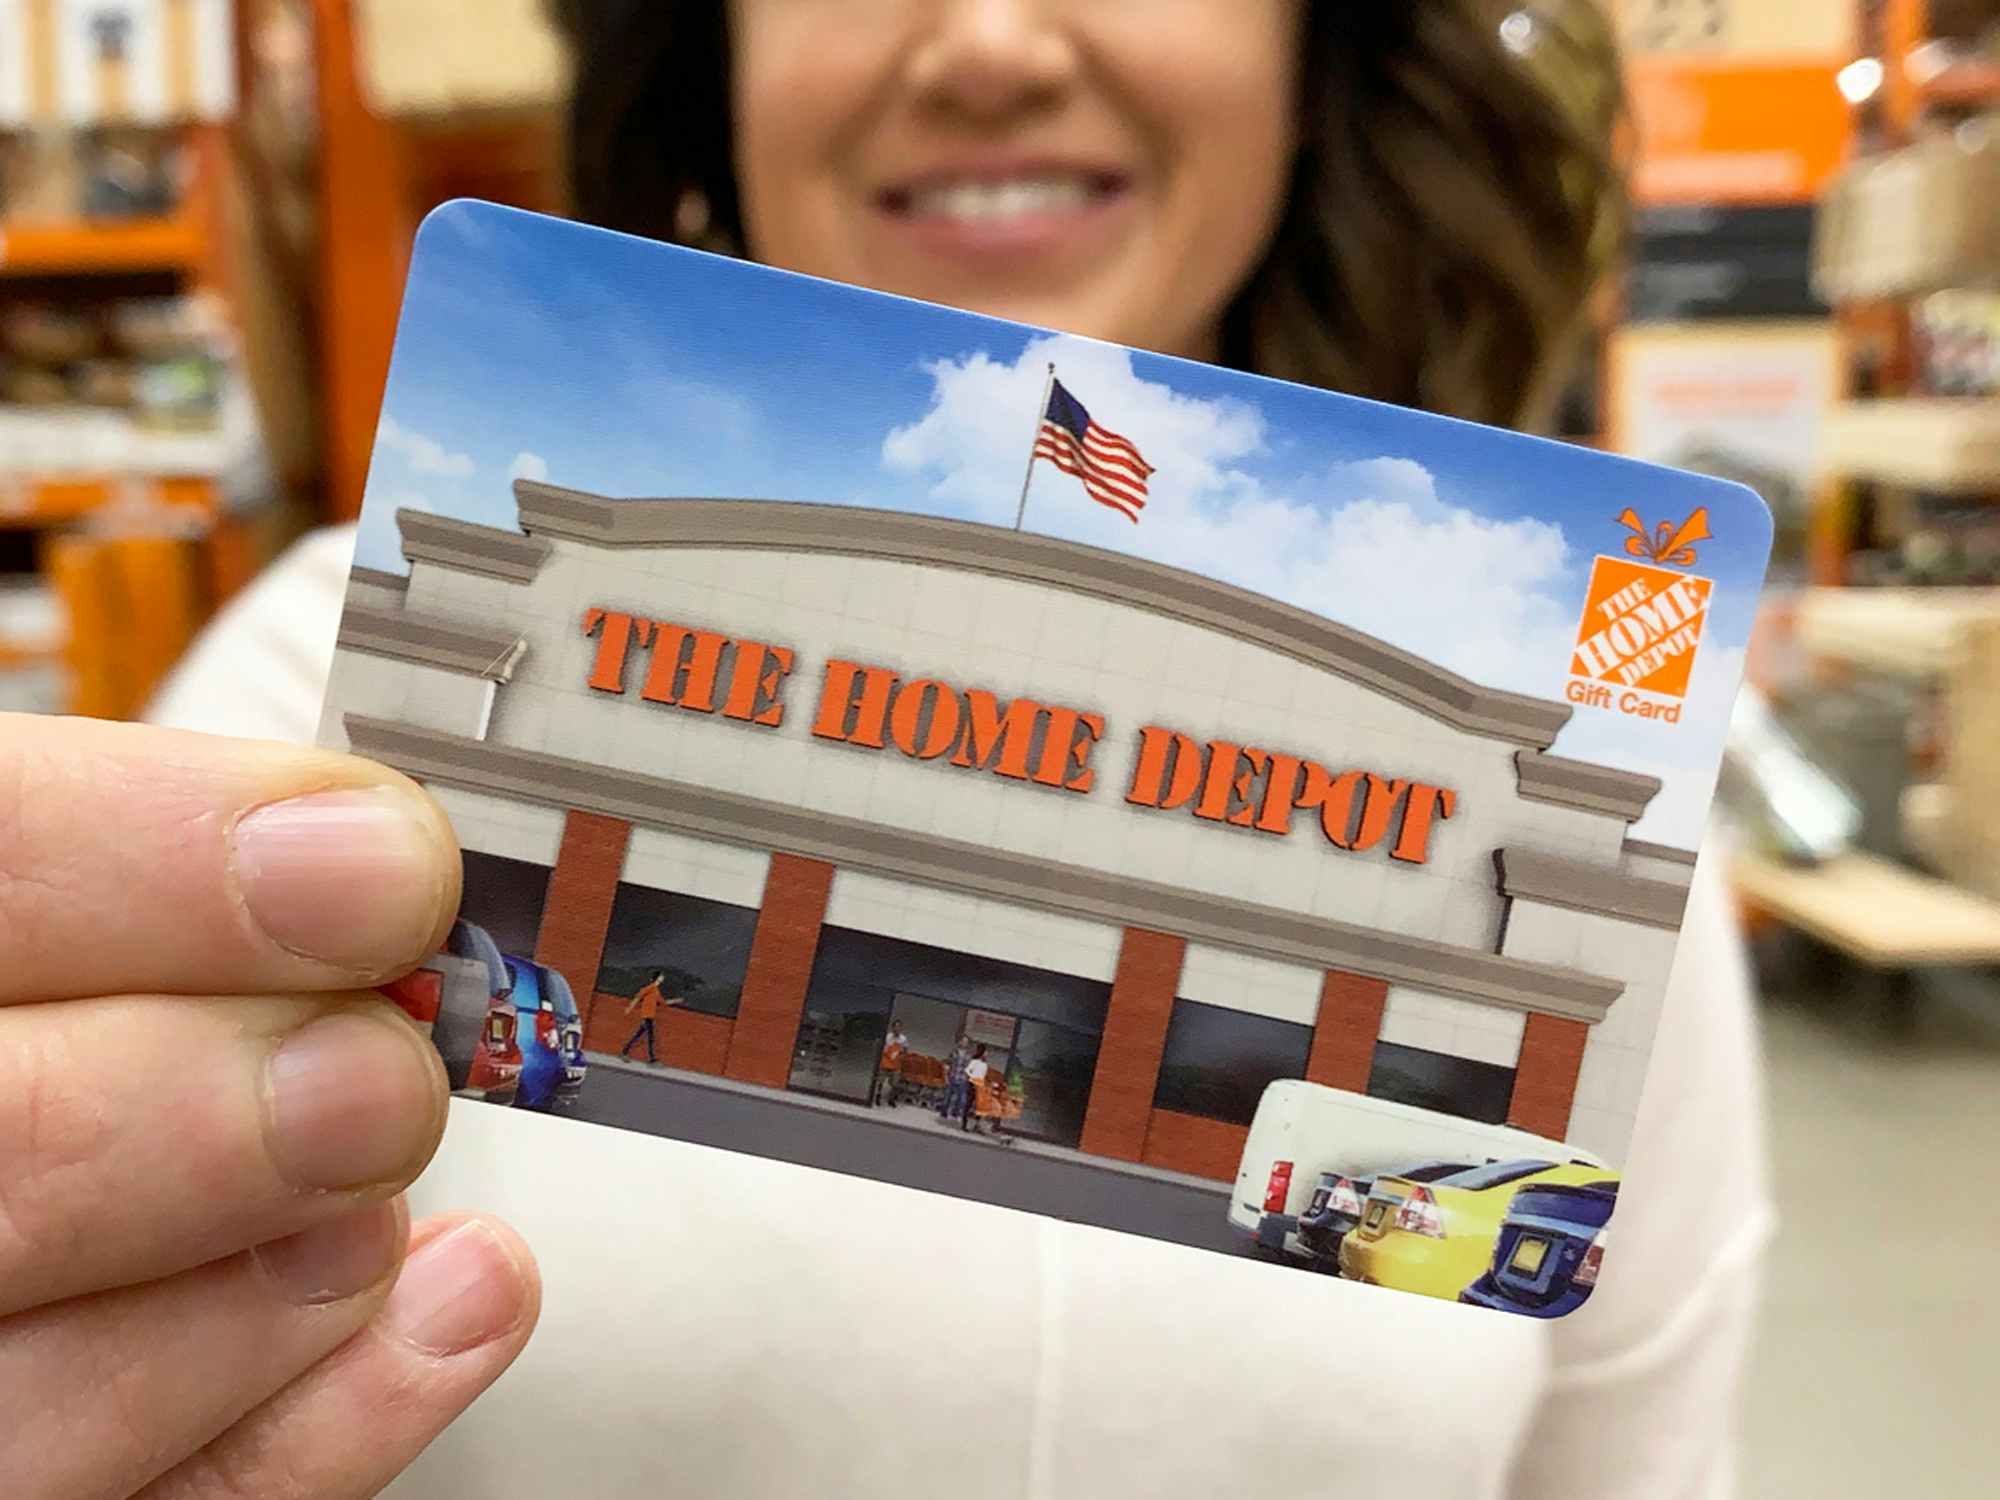 a person holding a Home Depot gift card in front of them